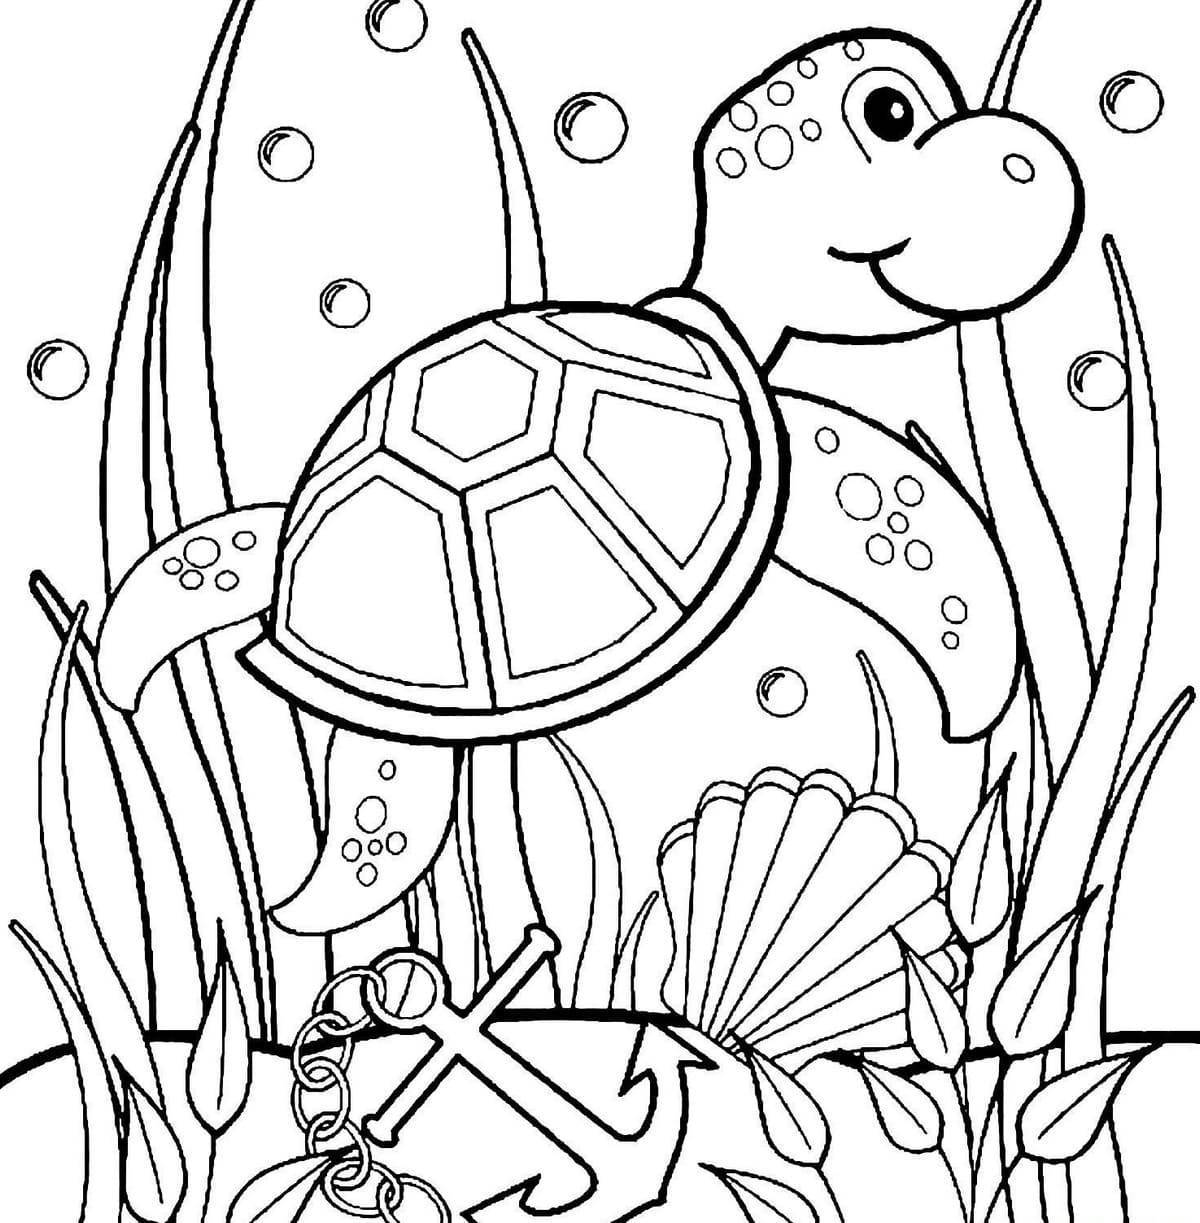 Coloring playful turtle